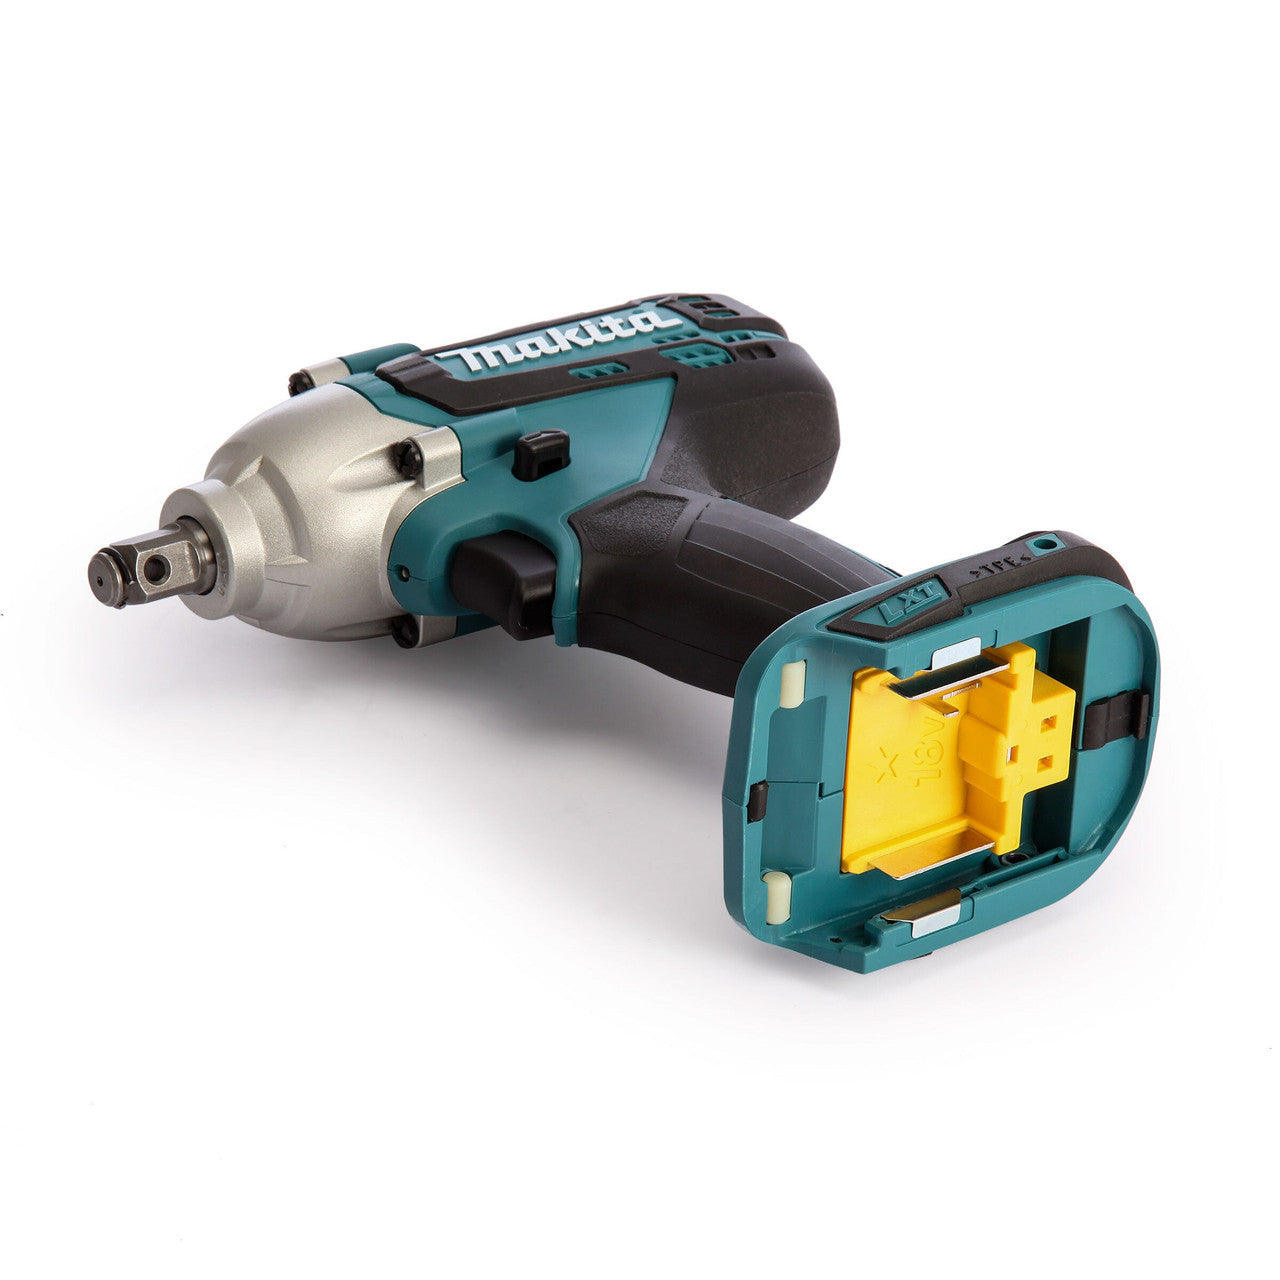 Makita DTW190Z 18V LXT Impact Wrench 1/2in (Body Only)